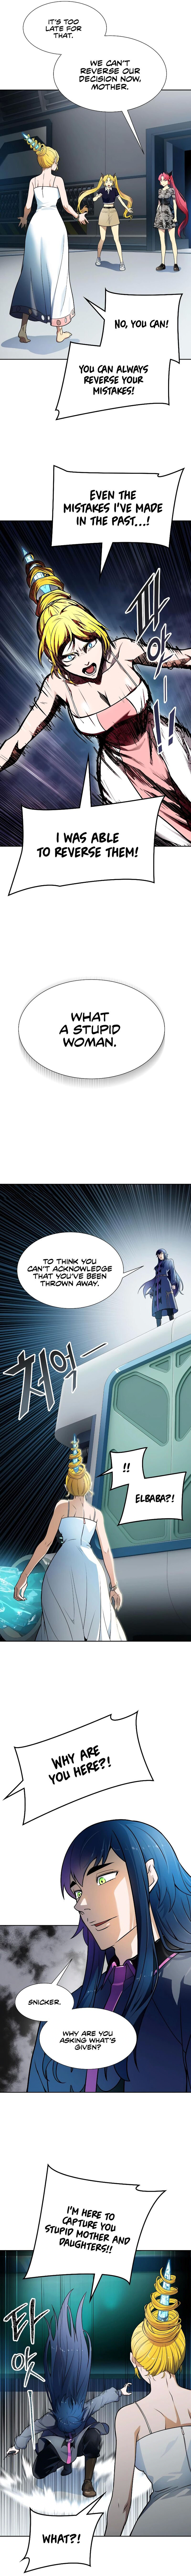 Tower Of God 578 18